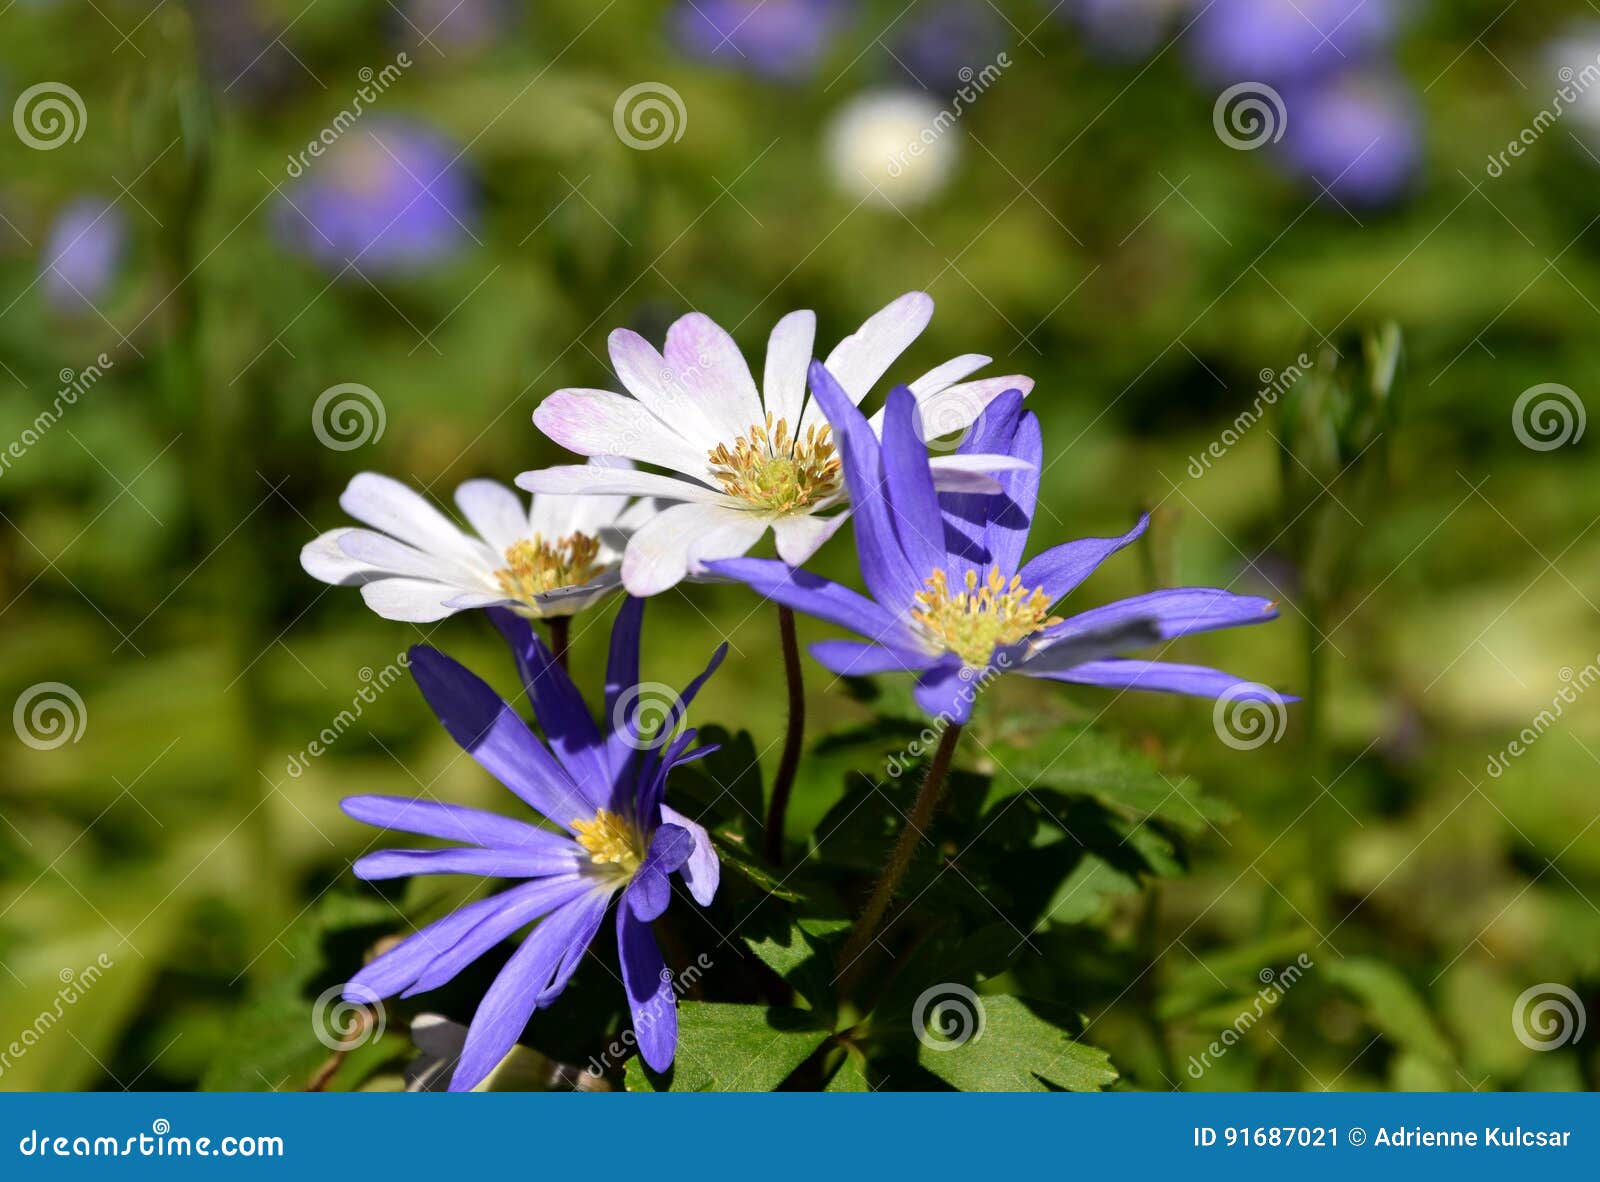 Purple and White Spring Daisies Stock Image - Image of bloom, floral:  91687021